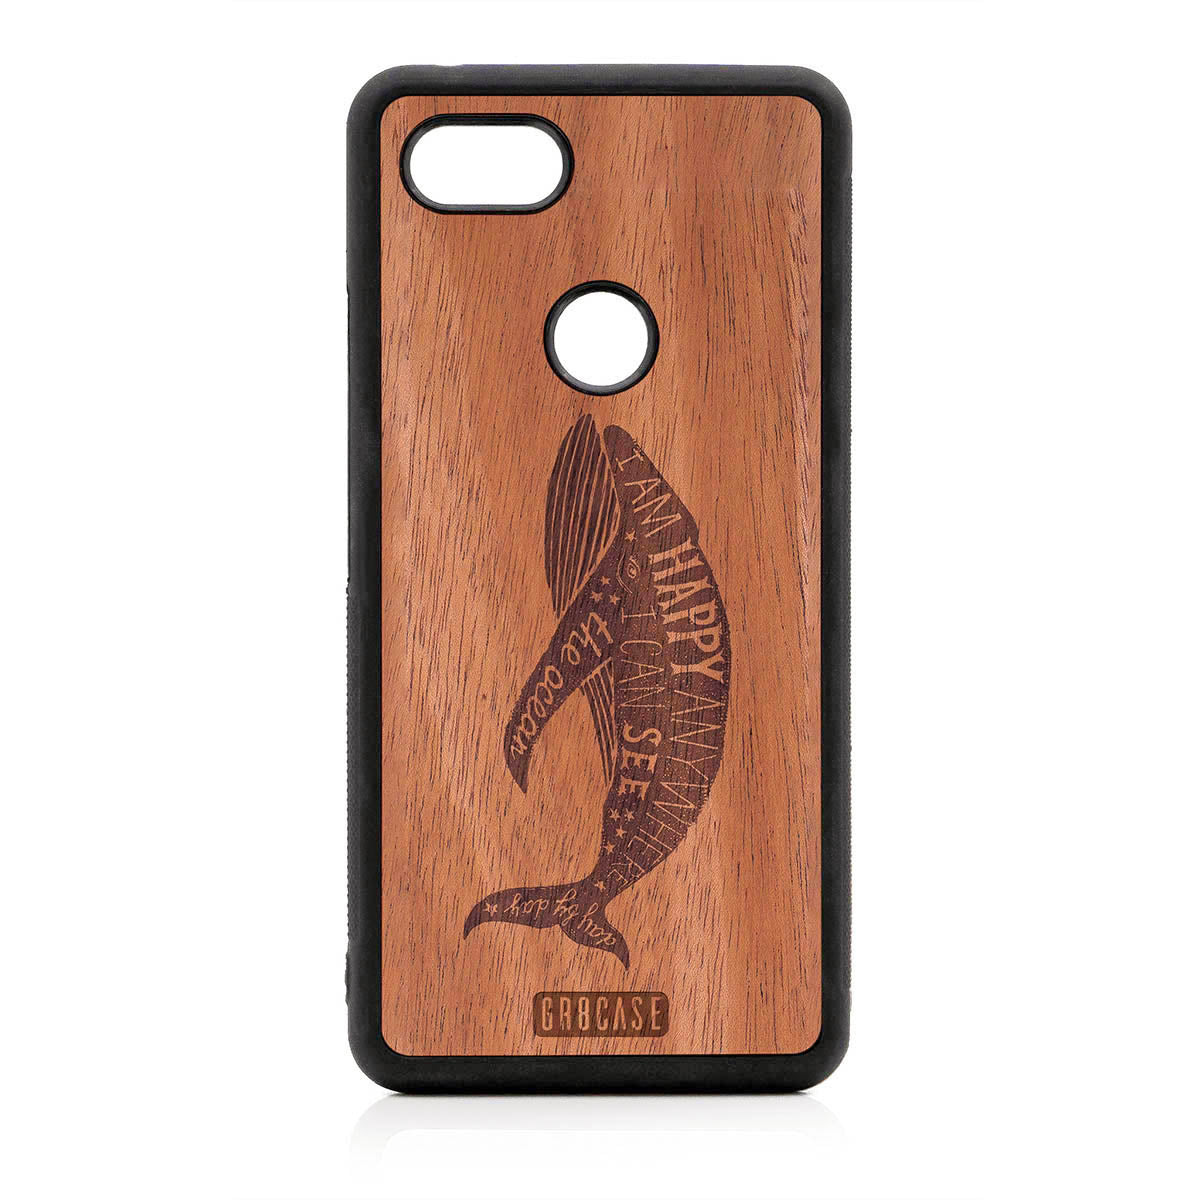 I'm Happy Anywhere I Can See The Ocean (Whale) Design Wood Case For Google Pixel 3 XL